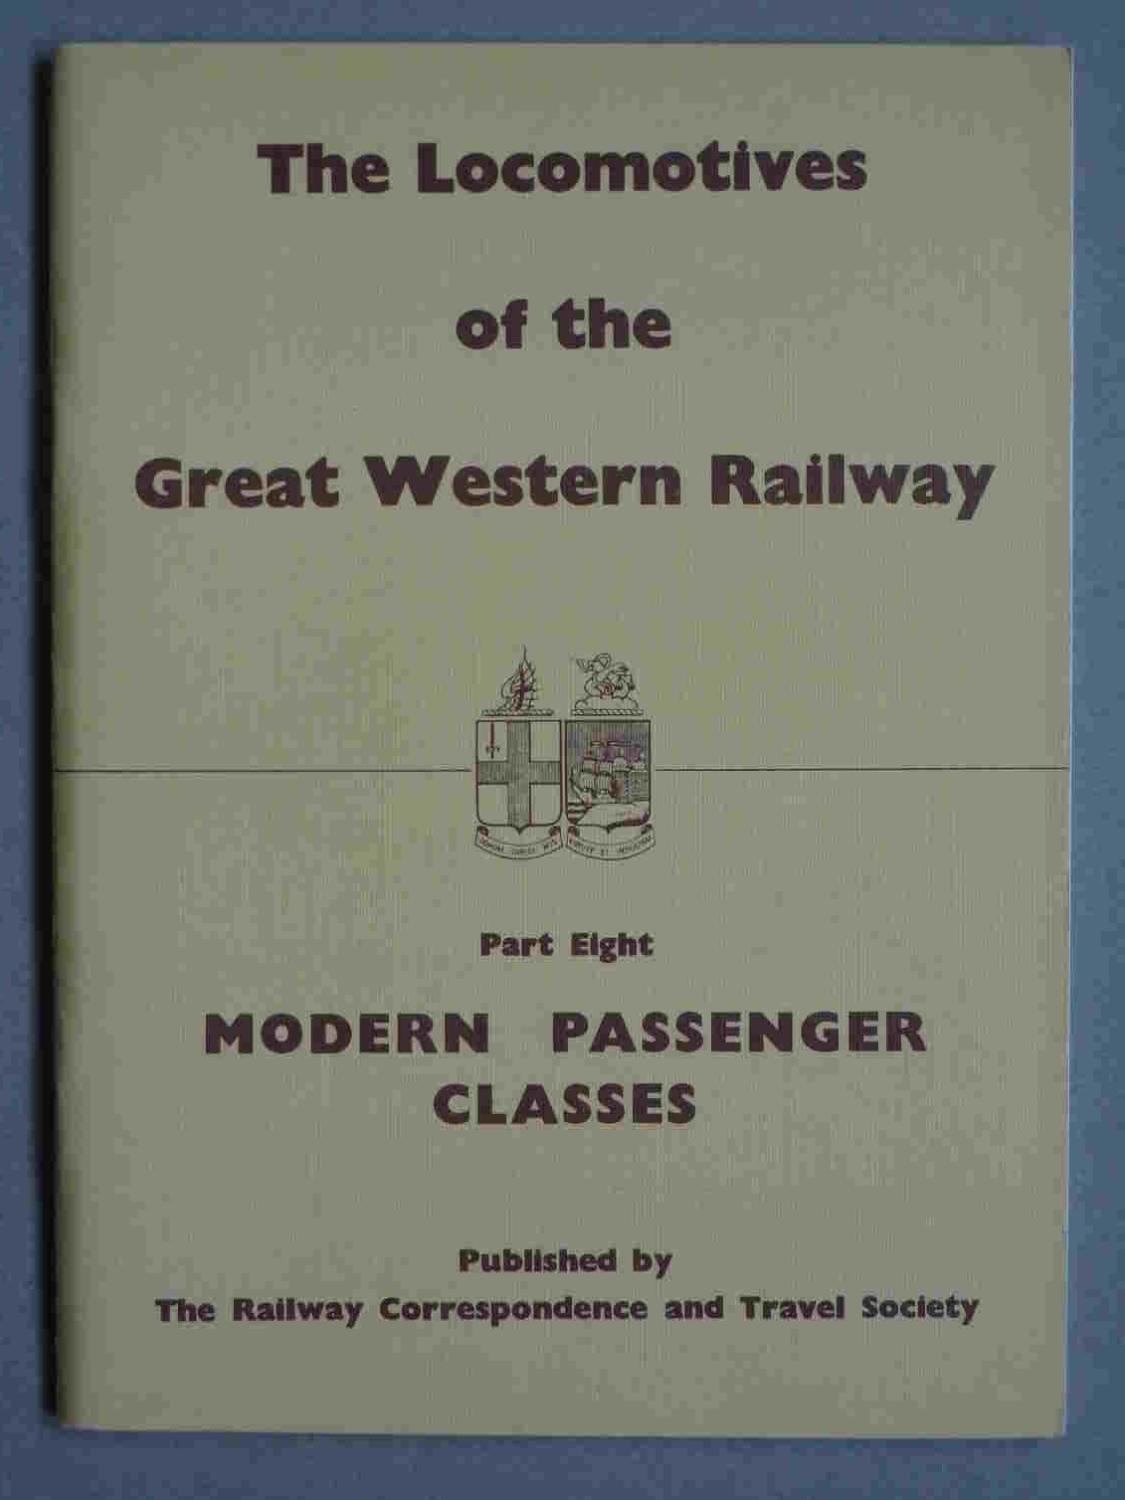 The Locomotives of the Great Western Railway - Author